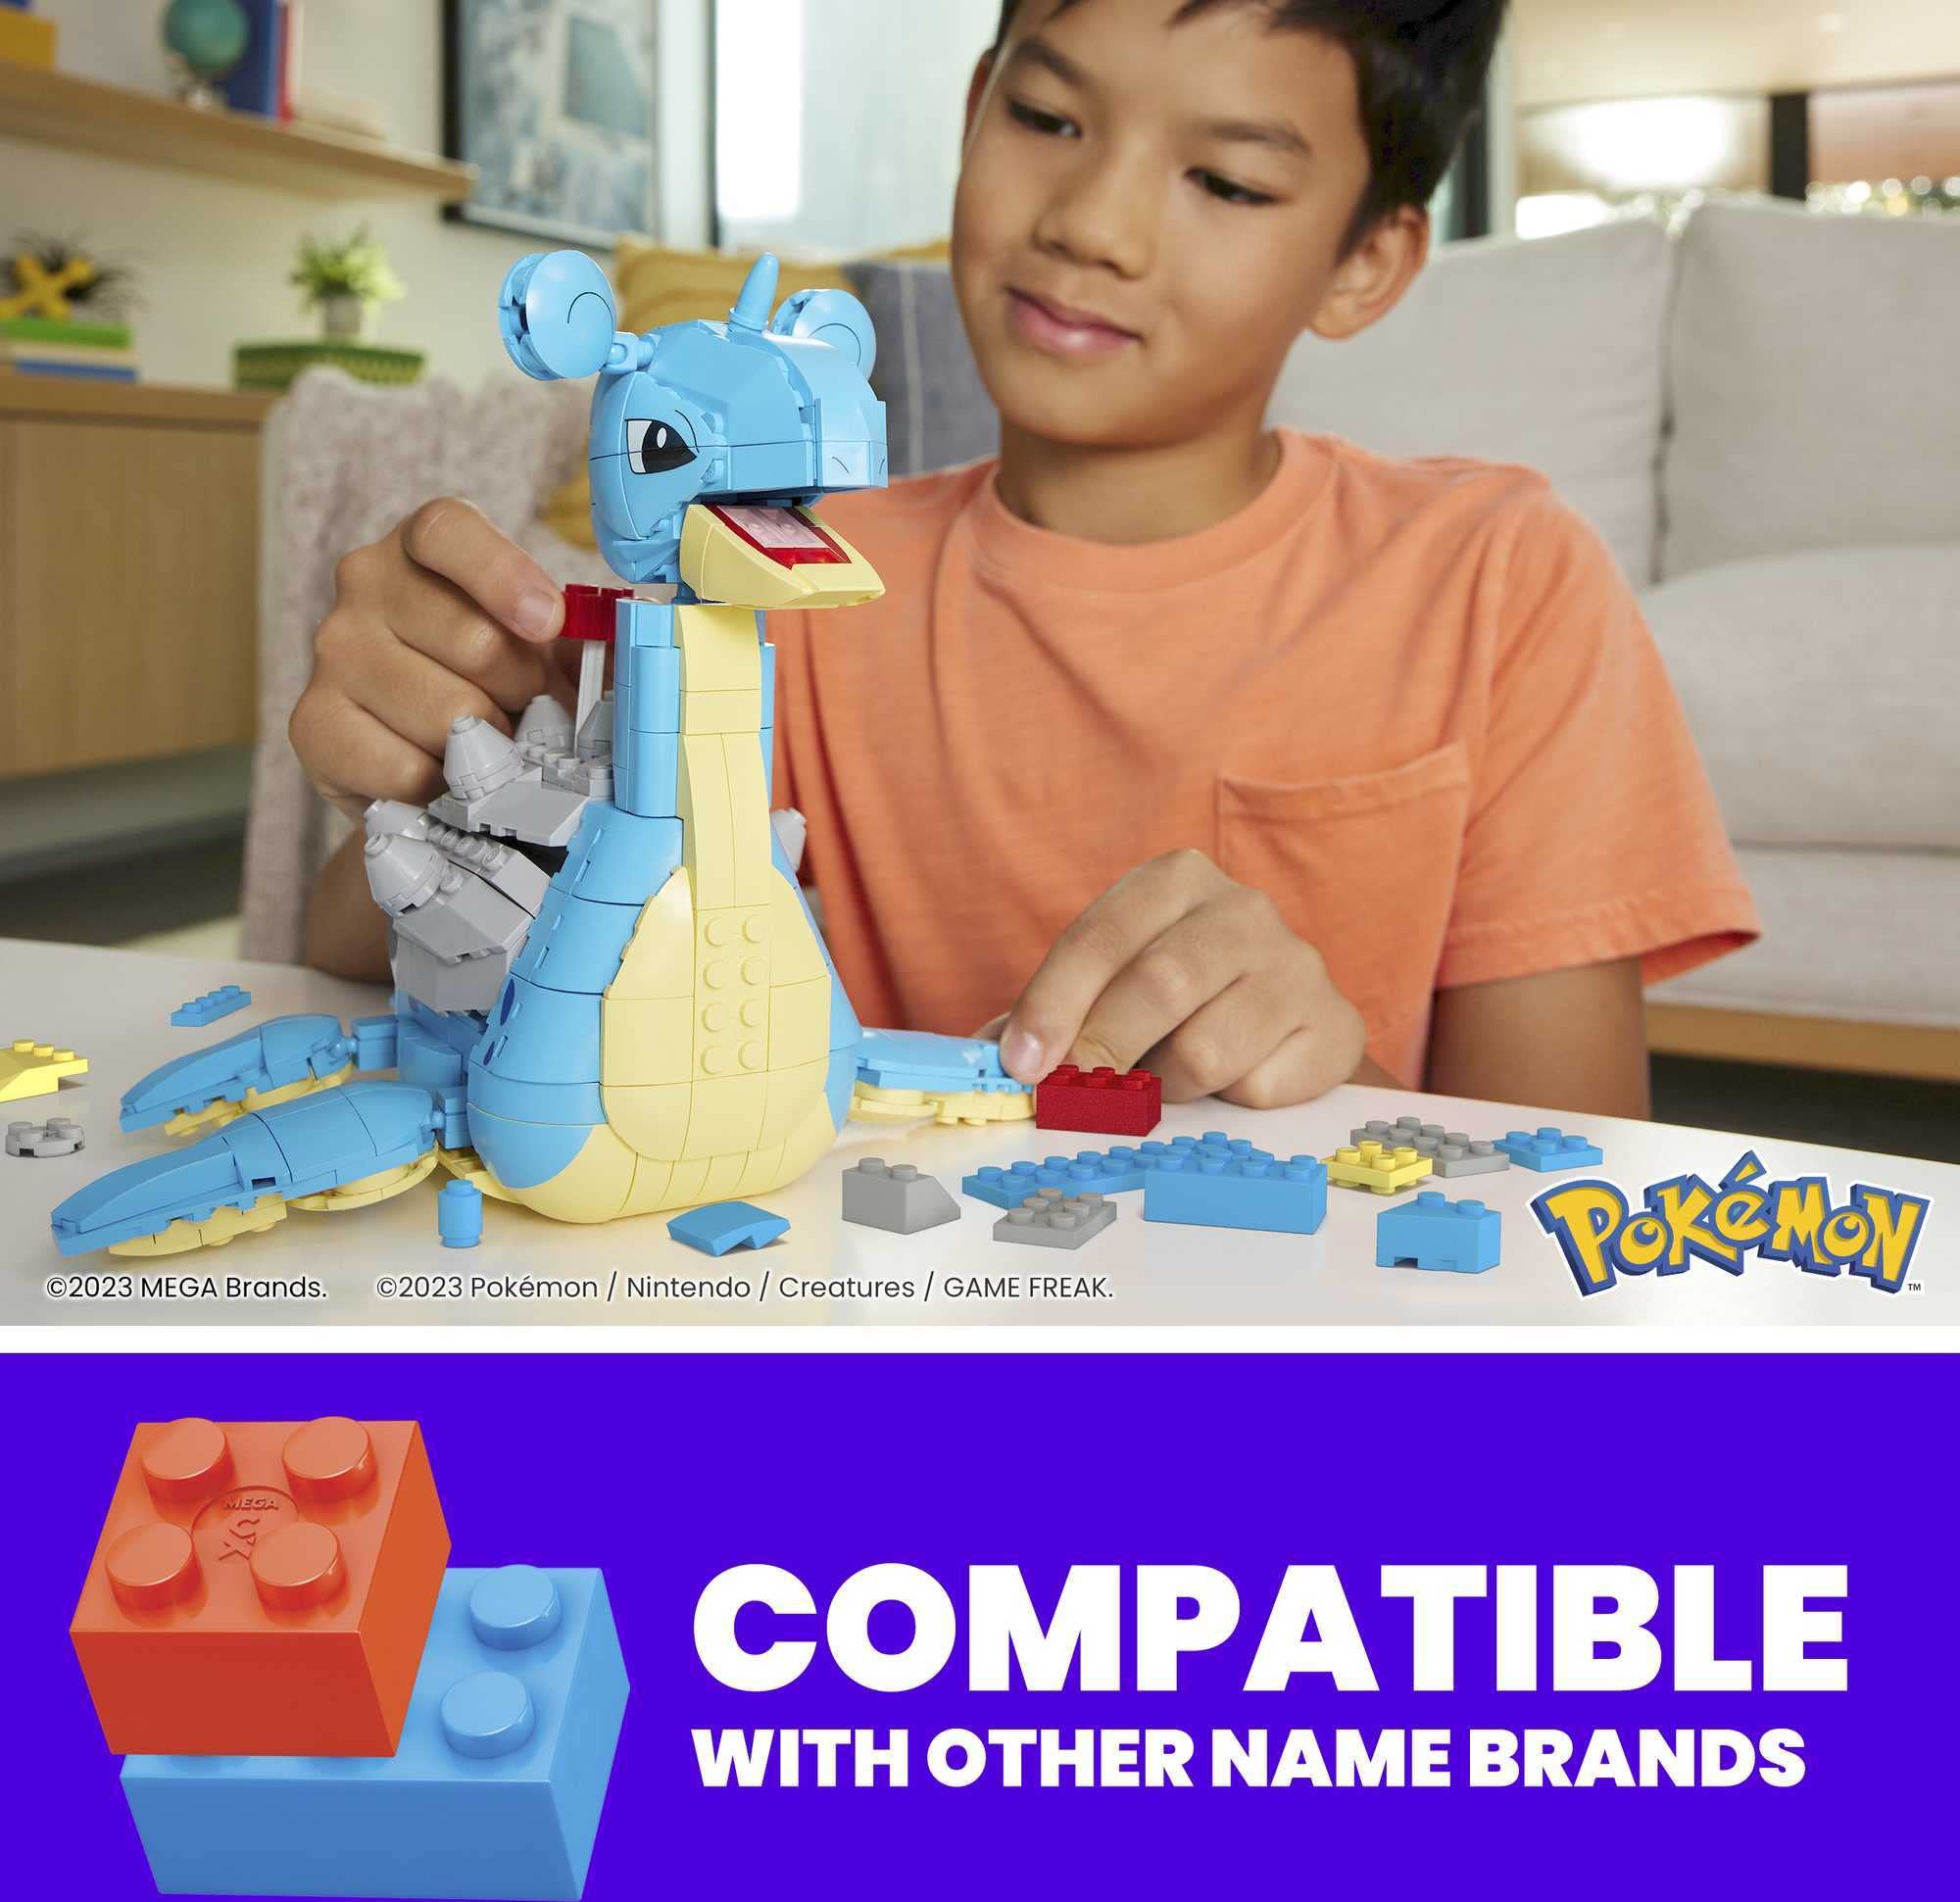 MEGA Pokémon Action Figure Building Toys Set for Kids, Lapras with 527 Pieces and Motion, Buildable and Poseable, 7 Inches Tall